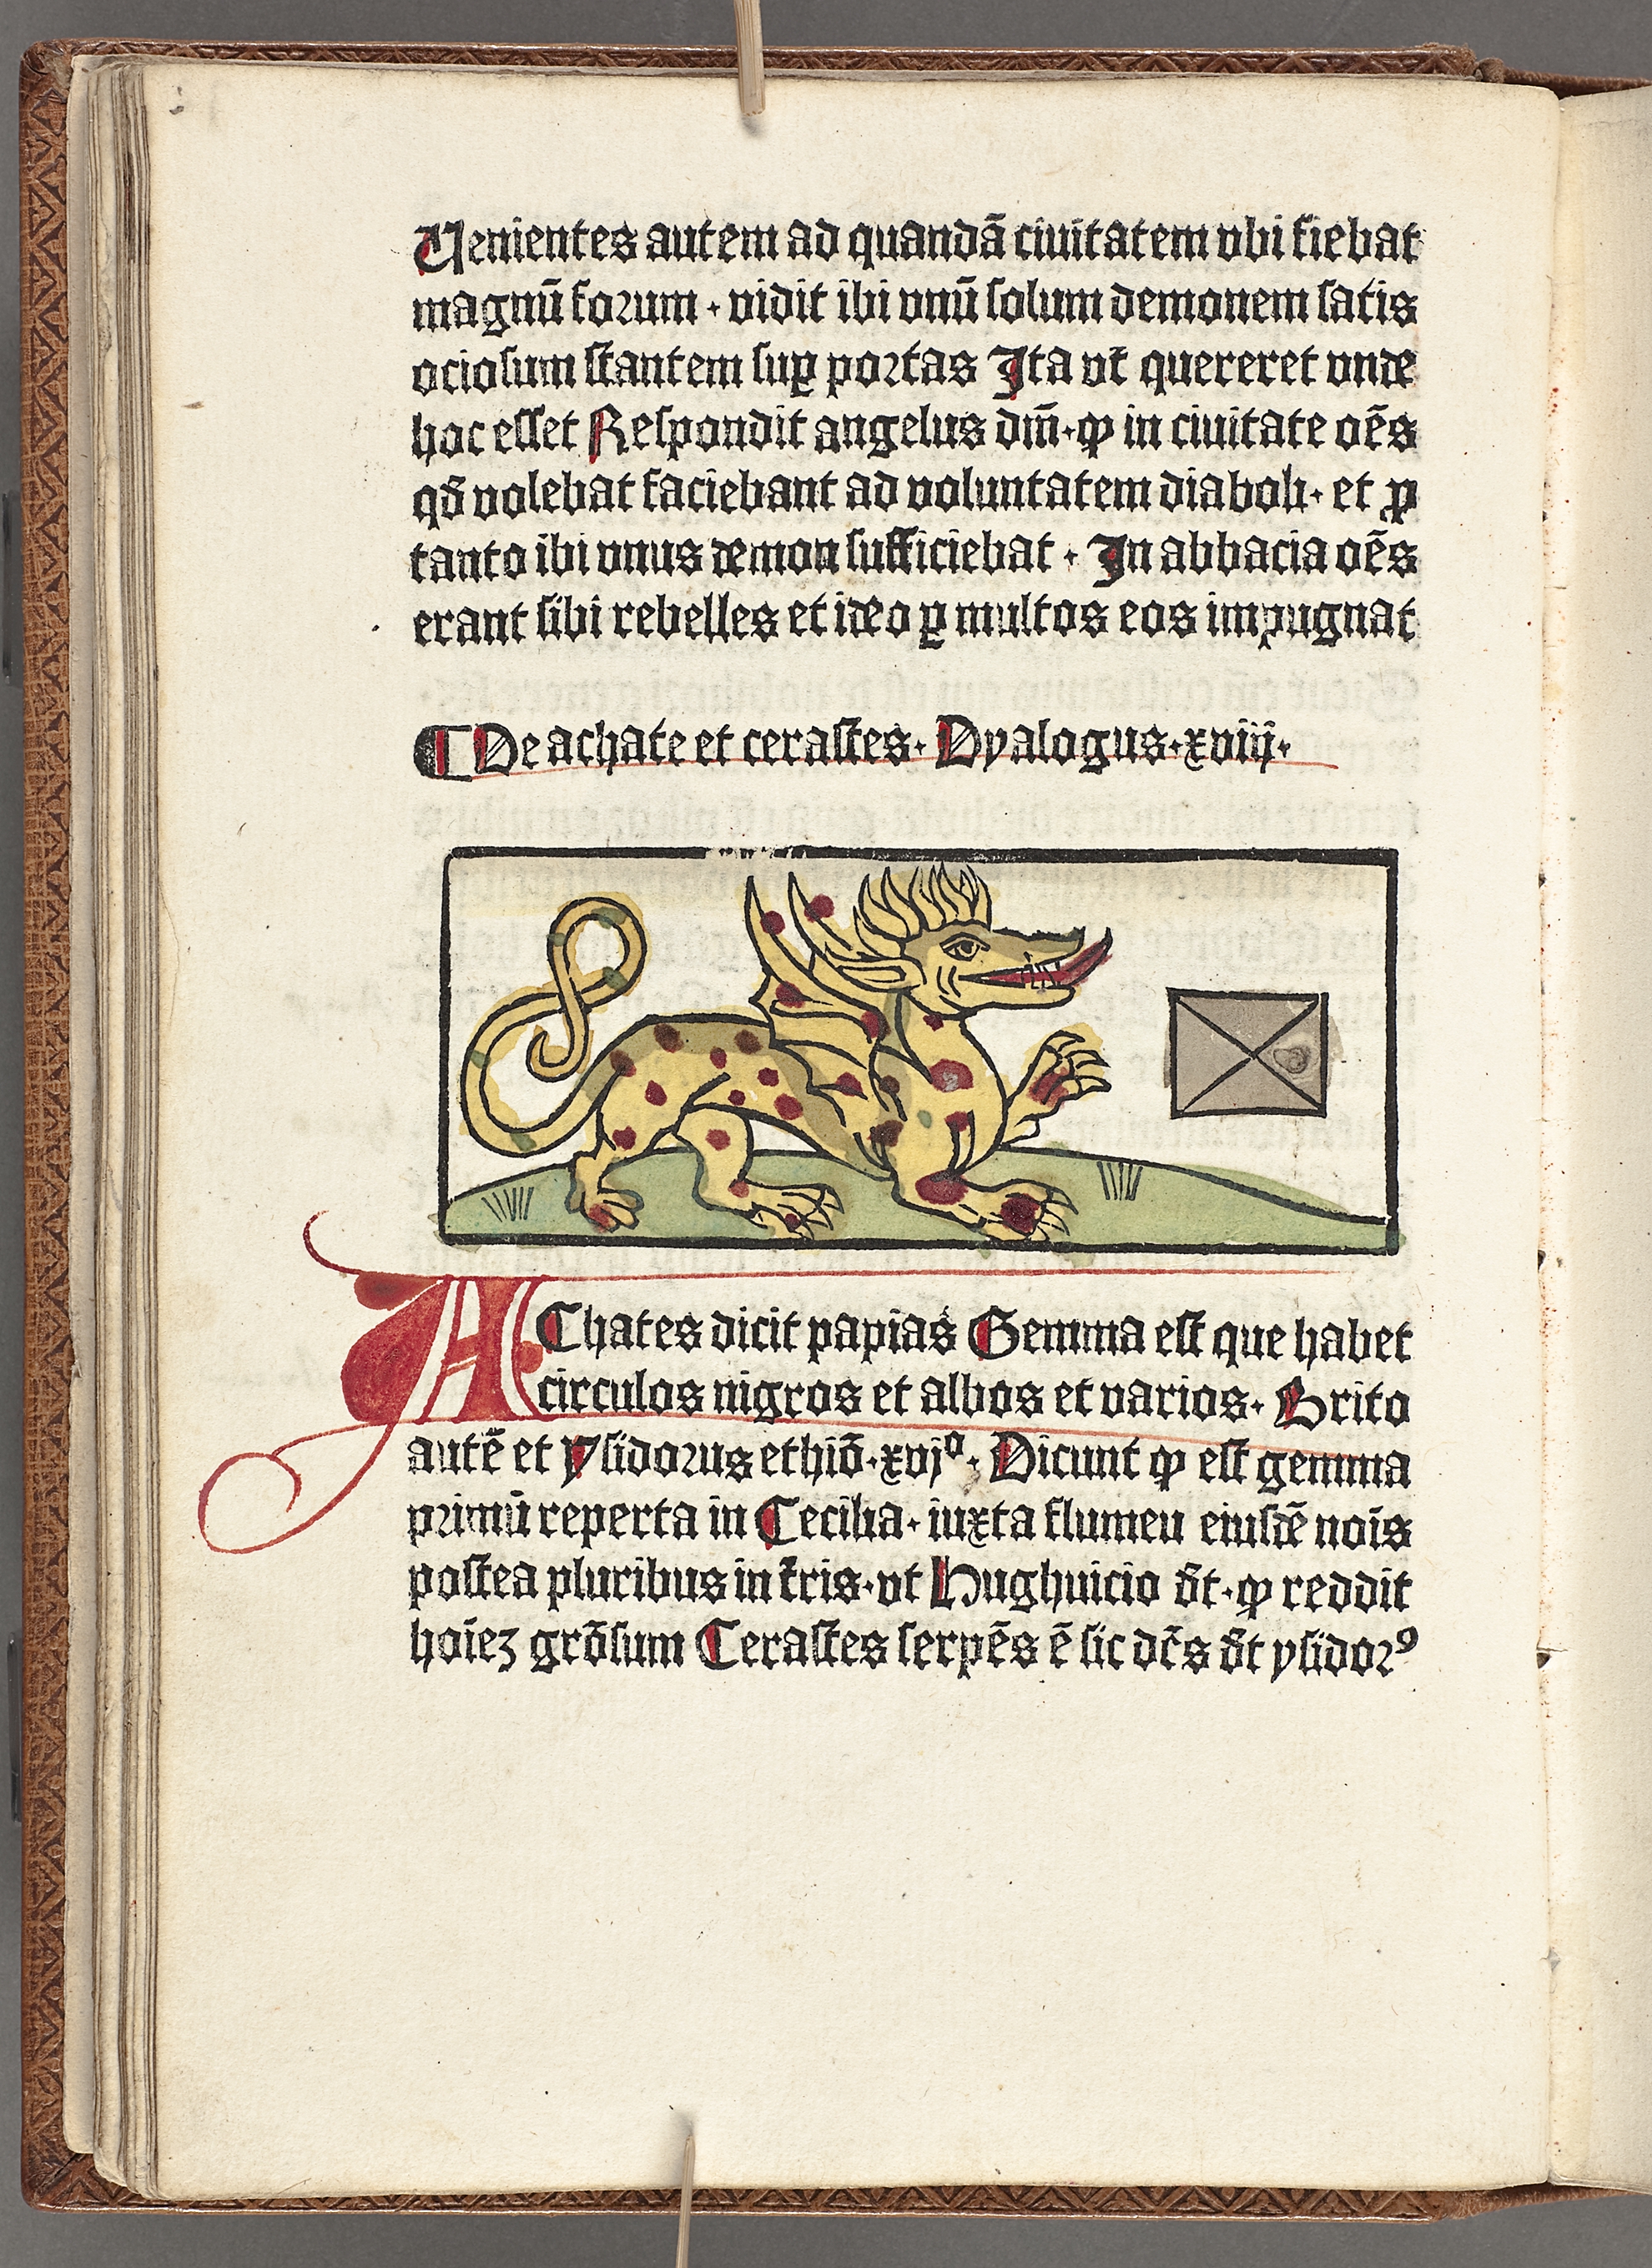 Old book page with gothic writing. In the middle is a dragon with his tongue outside his mouth.